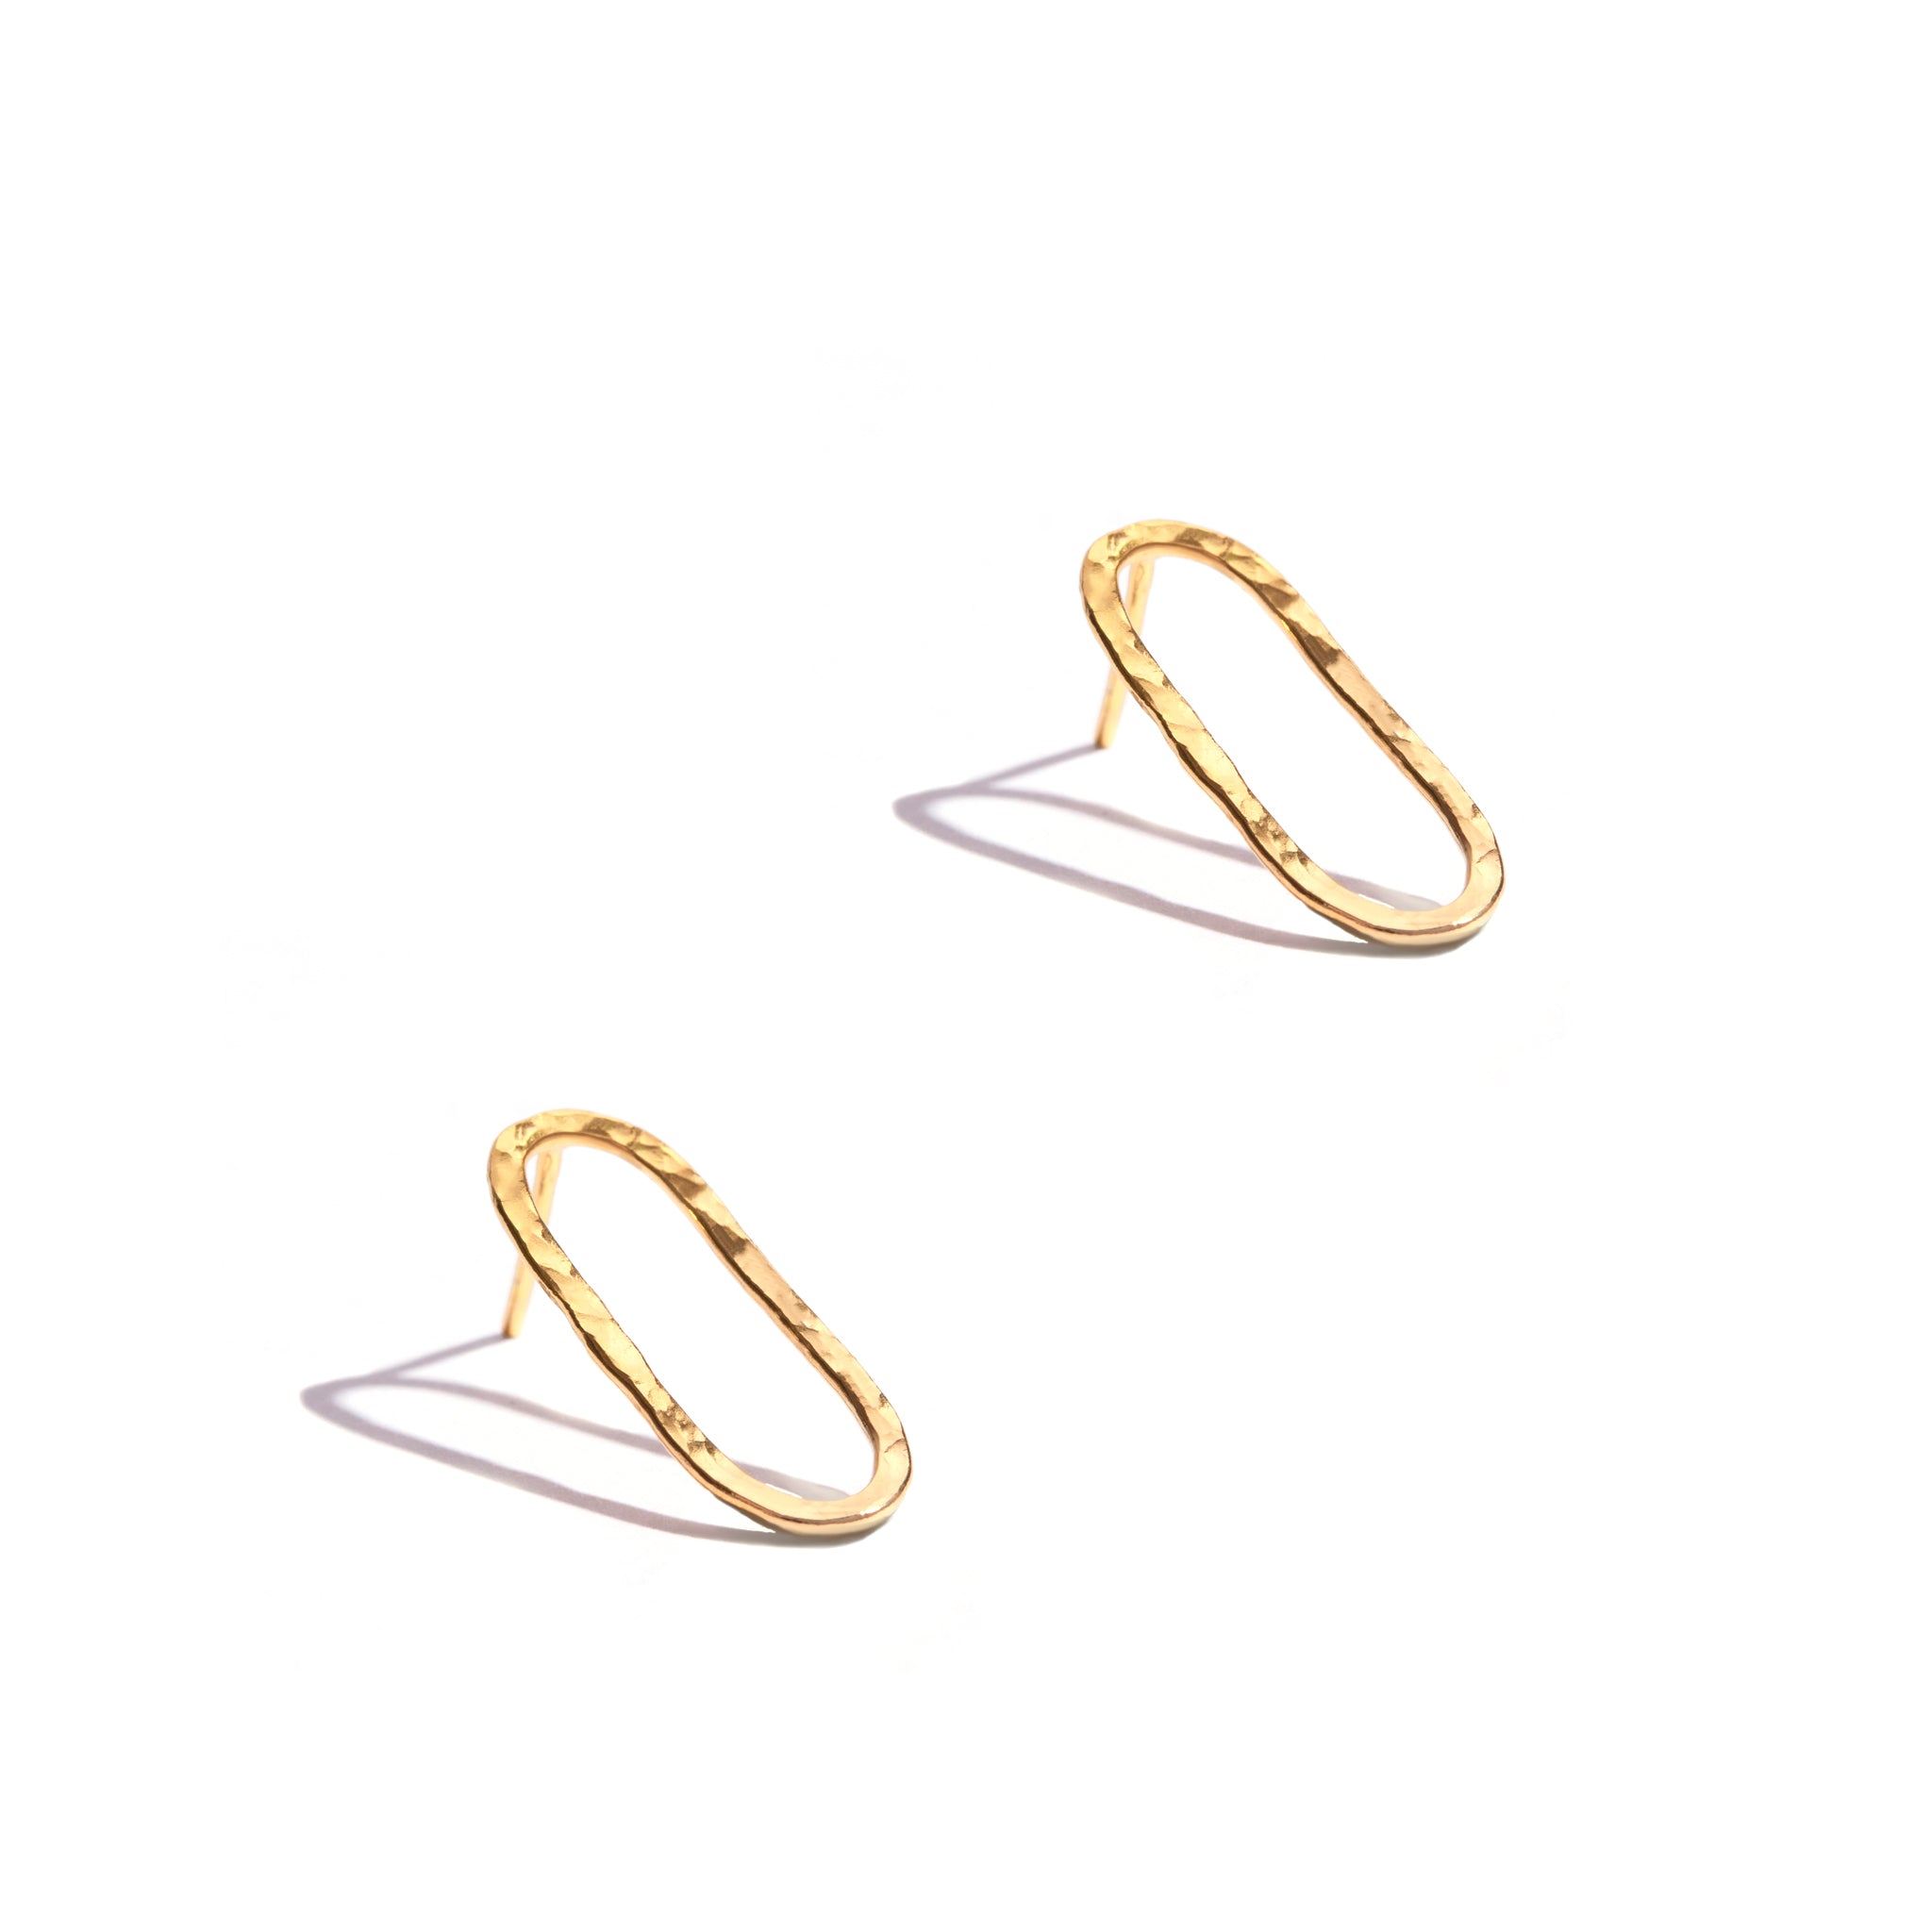 Simple Hammered Style Stud Earrings crafted from 14ct gold filled, versatile and perfect for any occasion